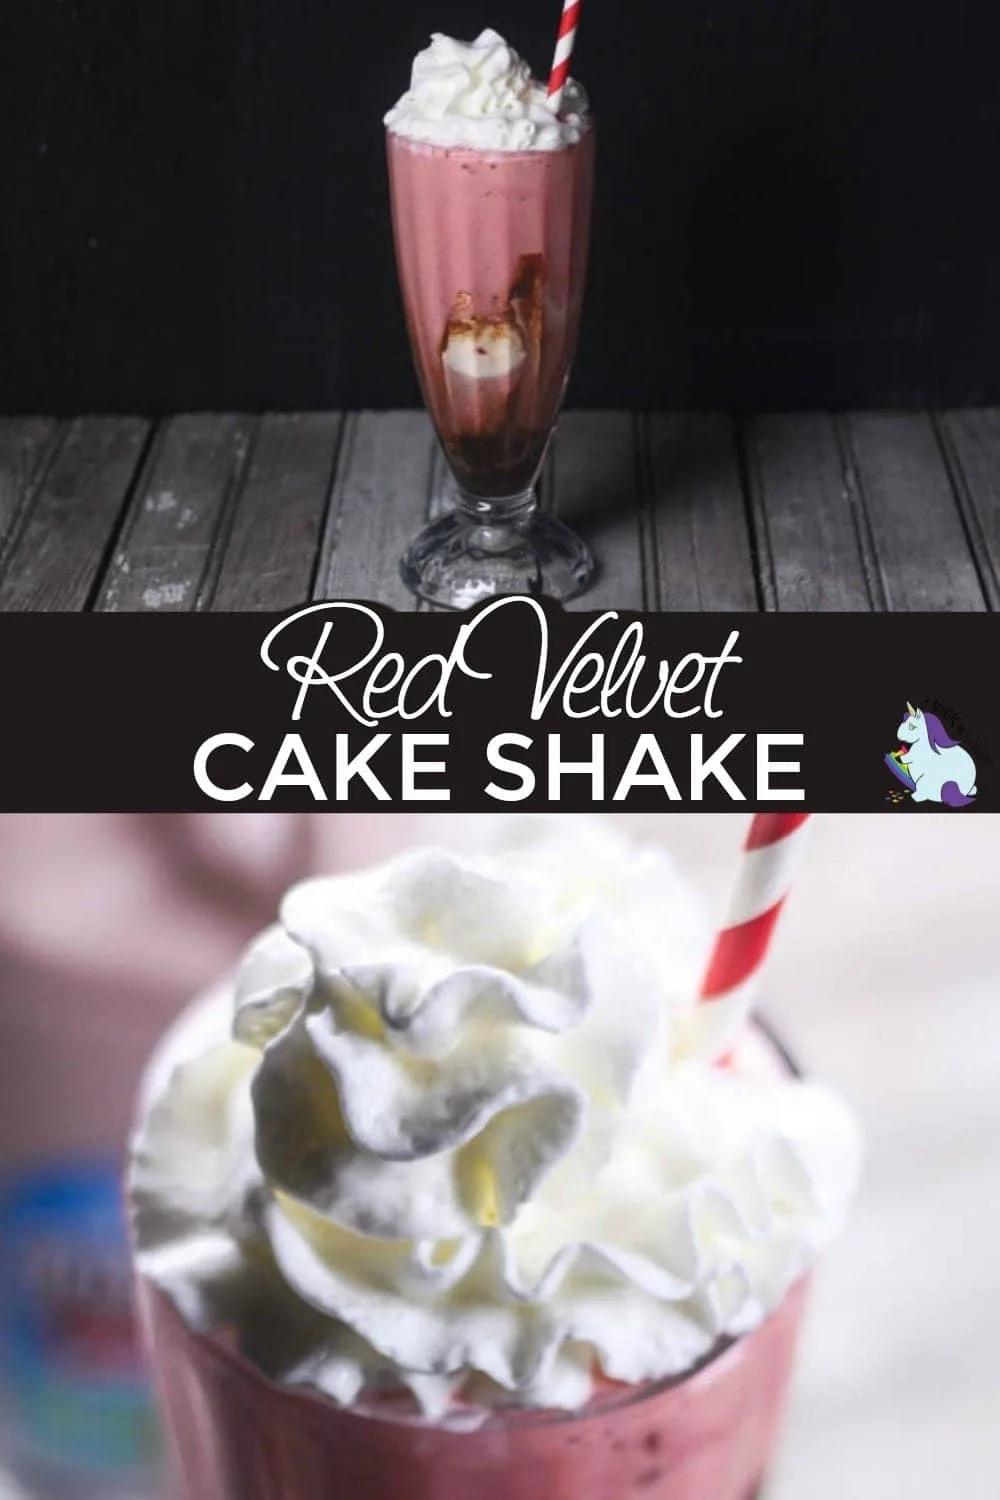 Shake in a glass and then a close up of whipped cream.